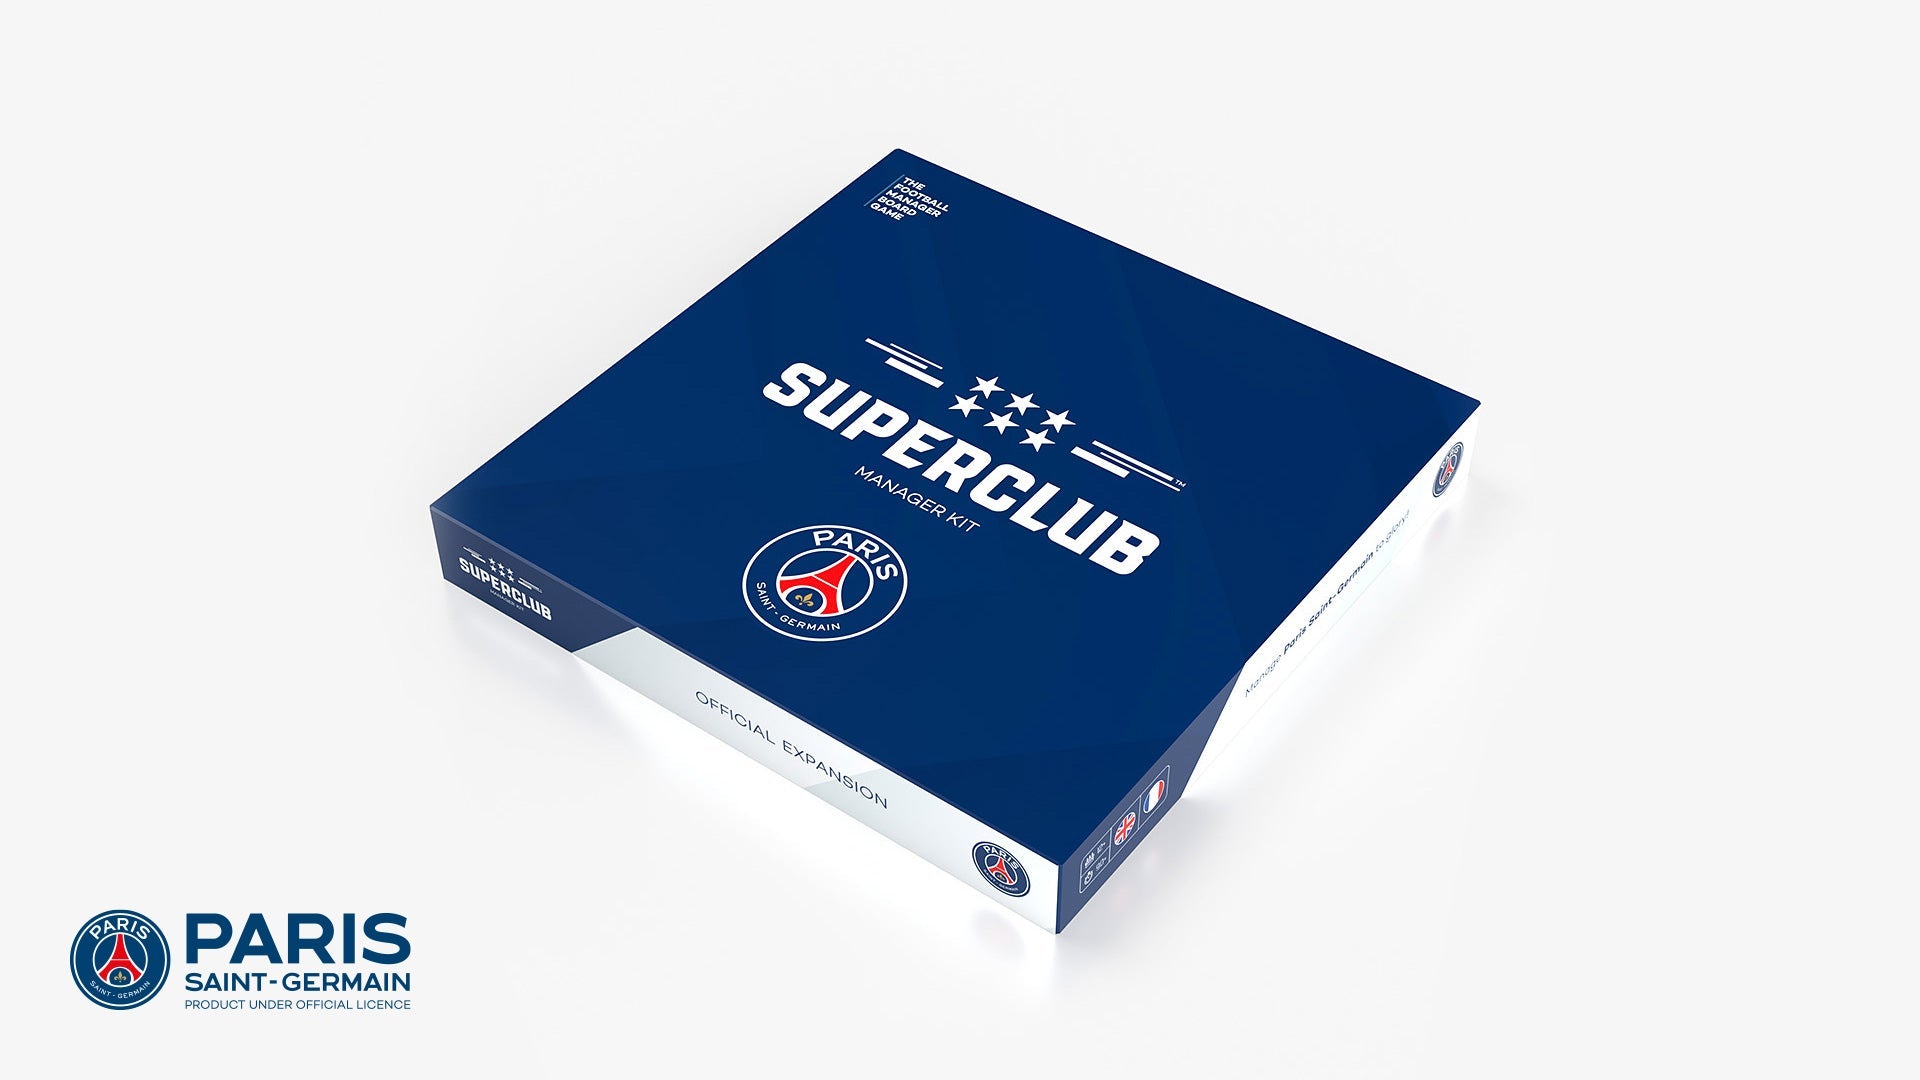 We’re super proud to have PSG as a part of the Superclub family